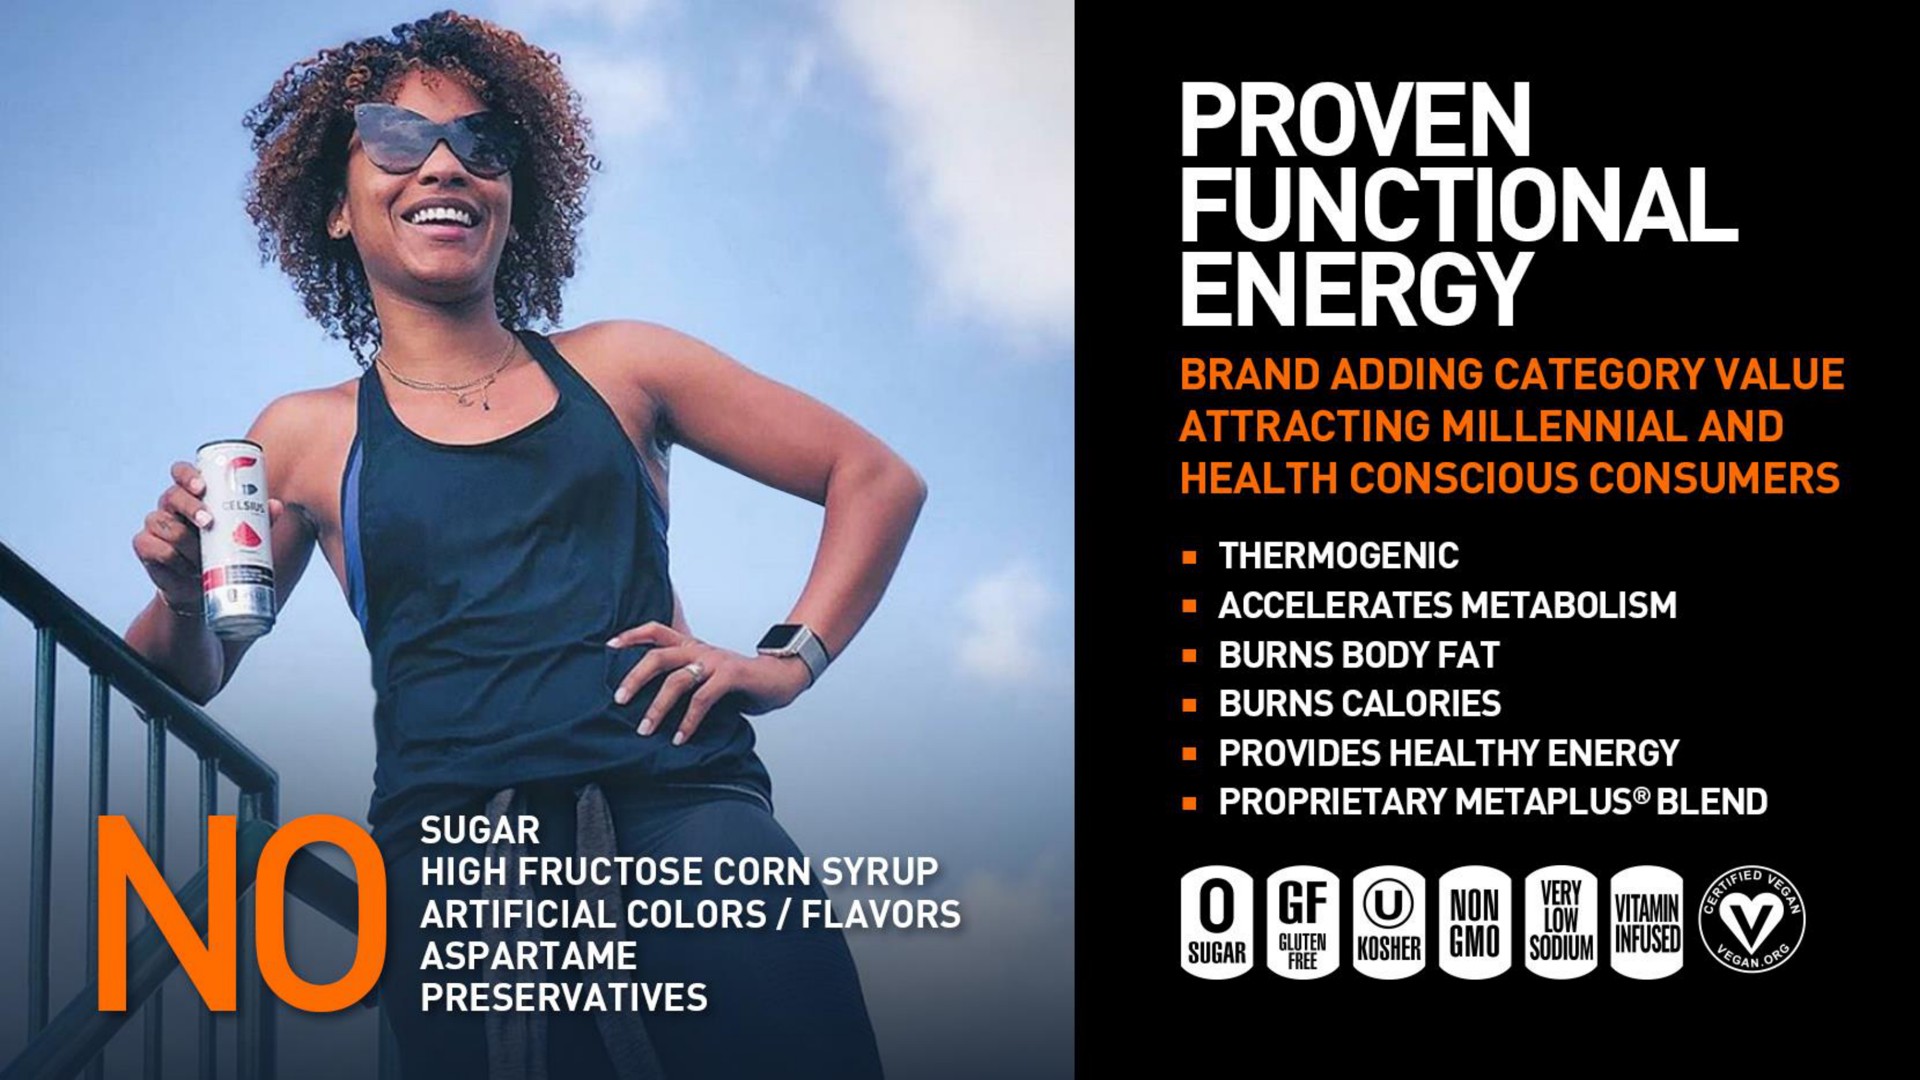 proven functional energy brand adding category value attracting millennial and health conscious consumers | Celsius Holdings